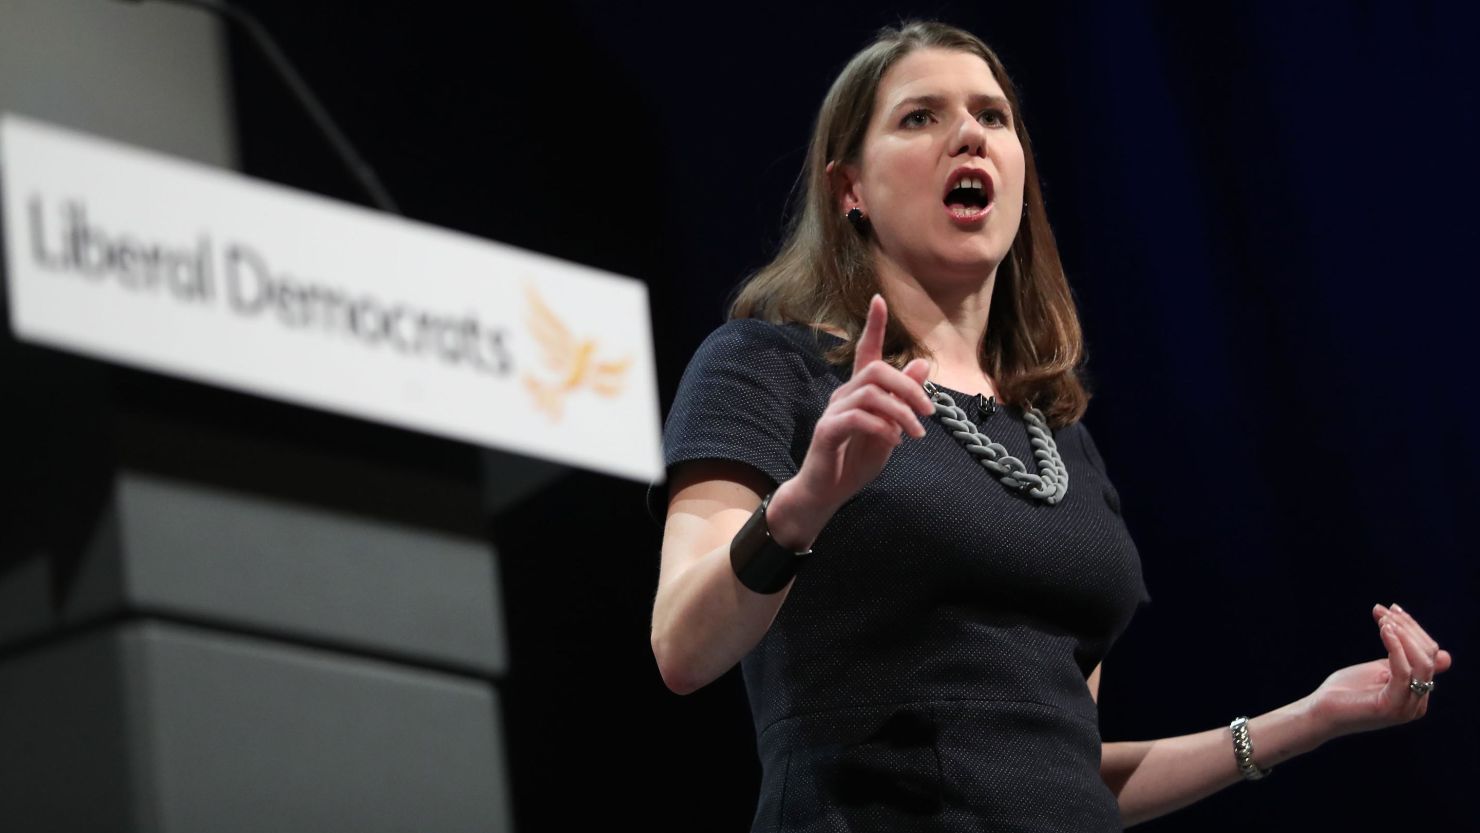 Member of Parliament Jo Swinson makes a speech during the second day of the Liberal Democrats autumn conference at the Bournemouth International Center.